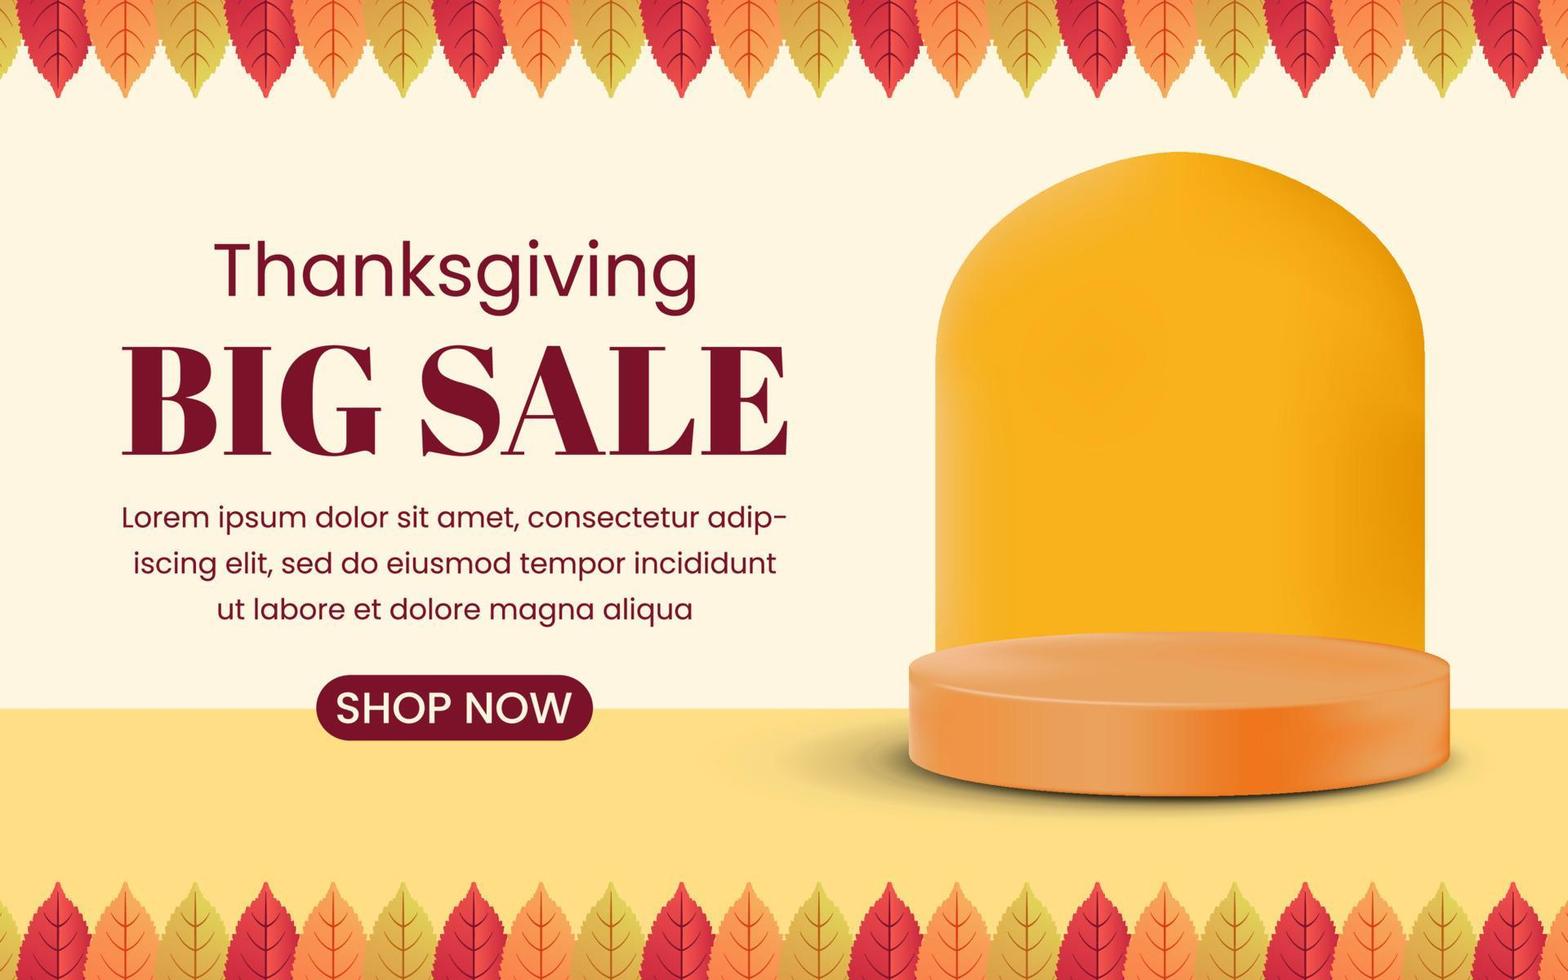 Thanksgiving Big Sale Banner with podium product. vector